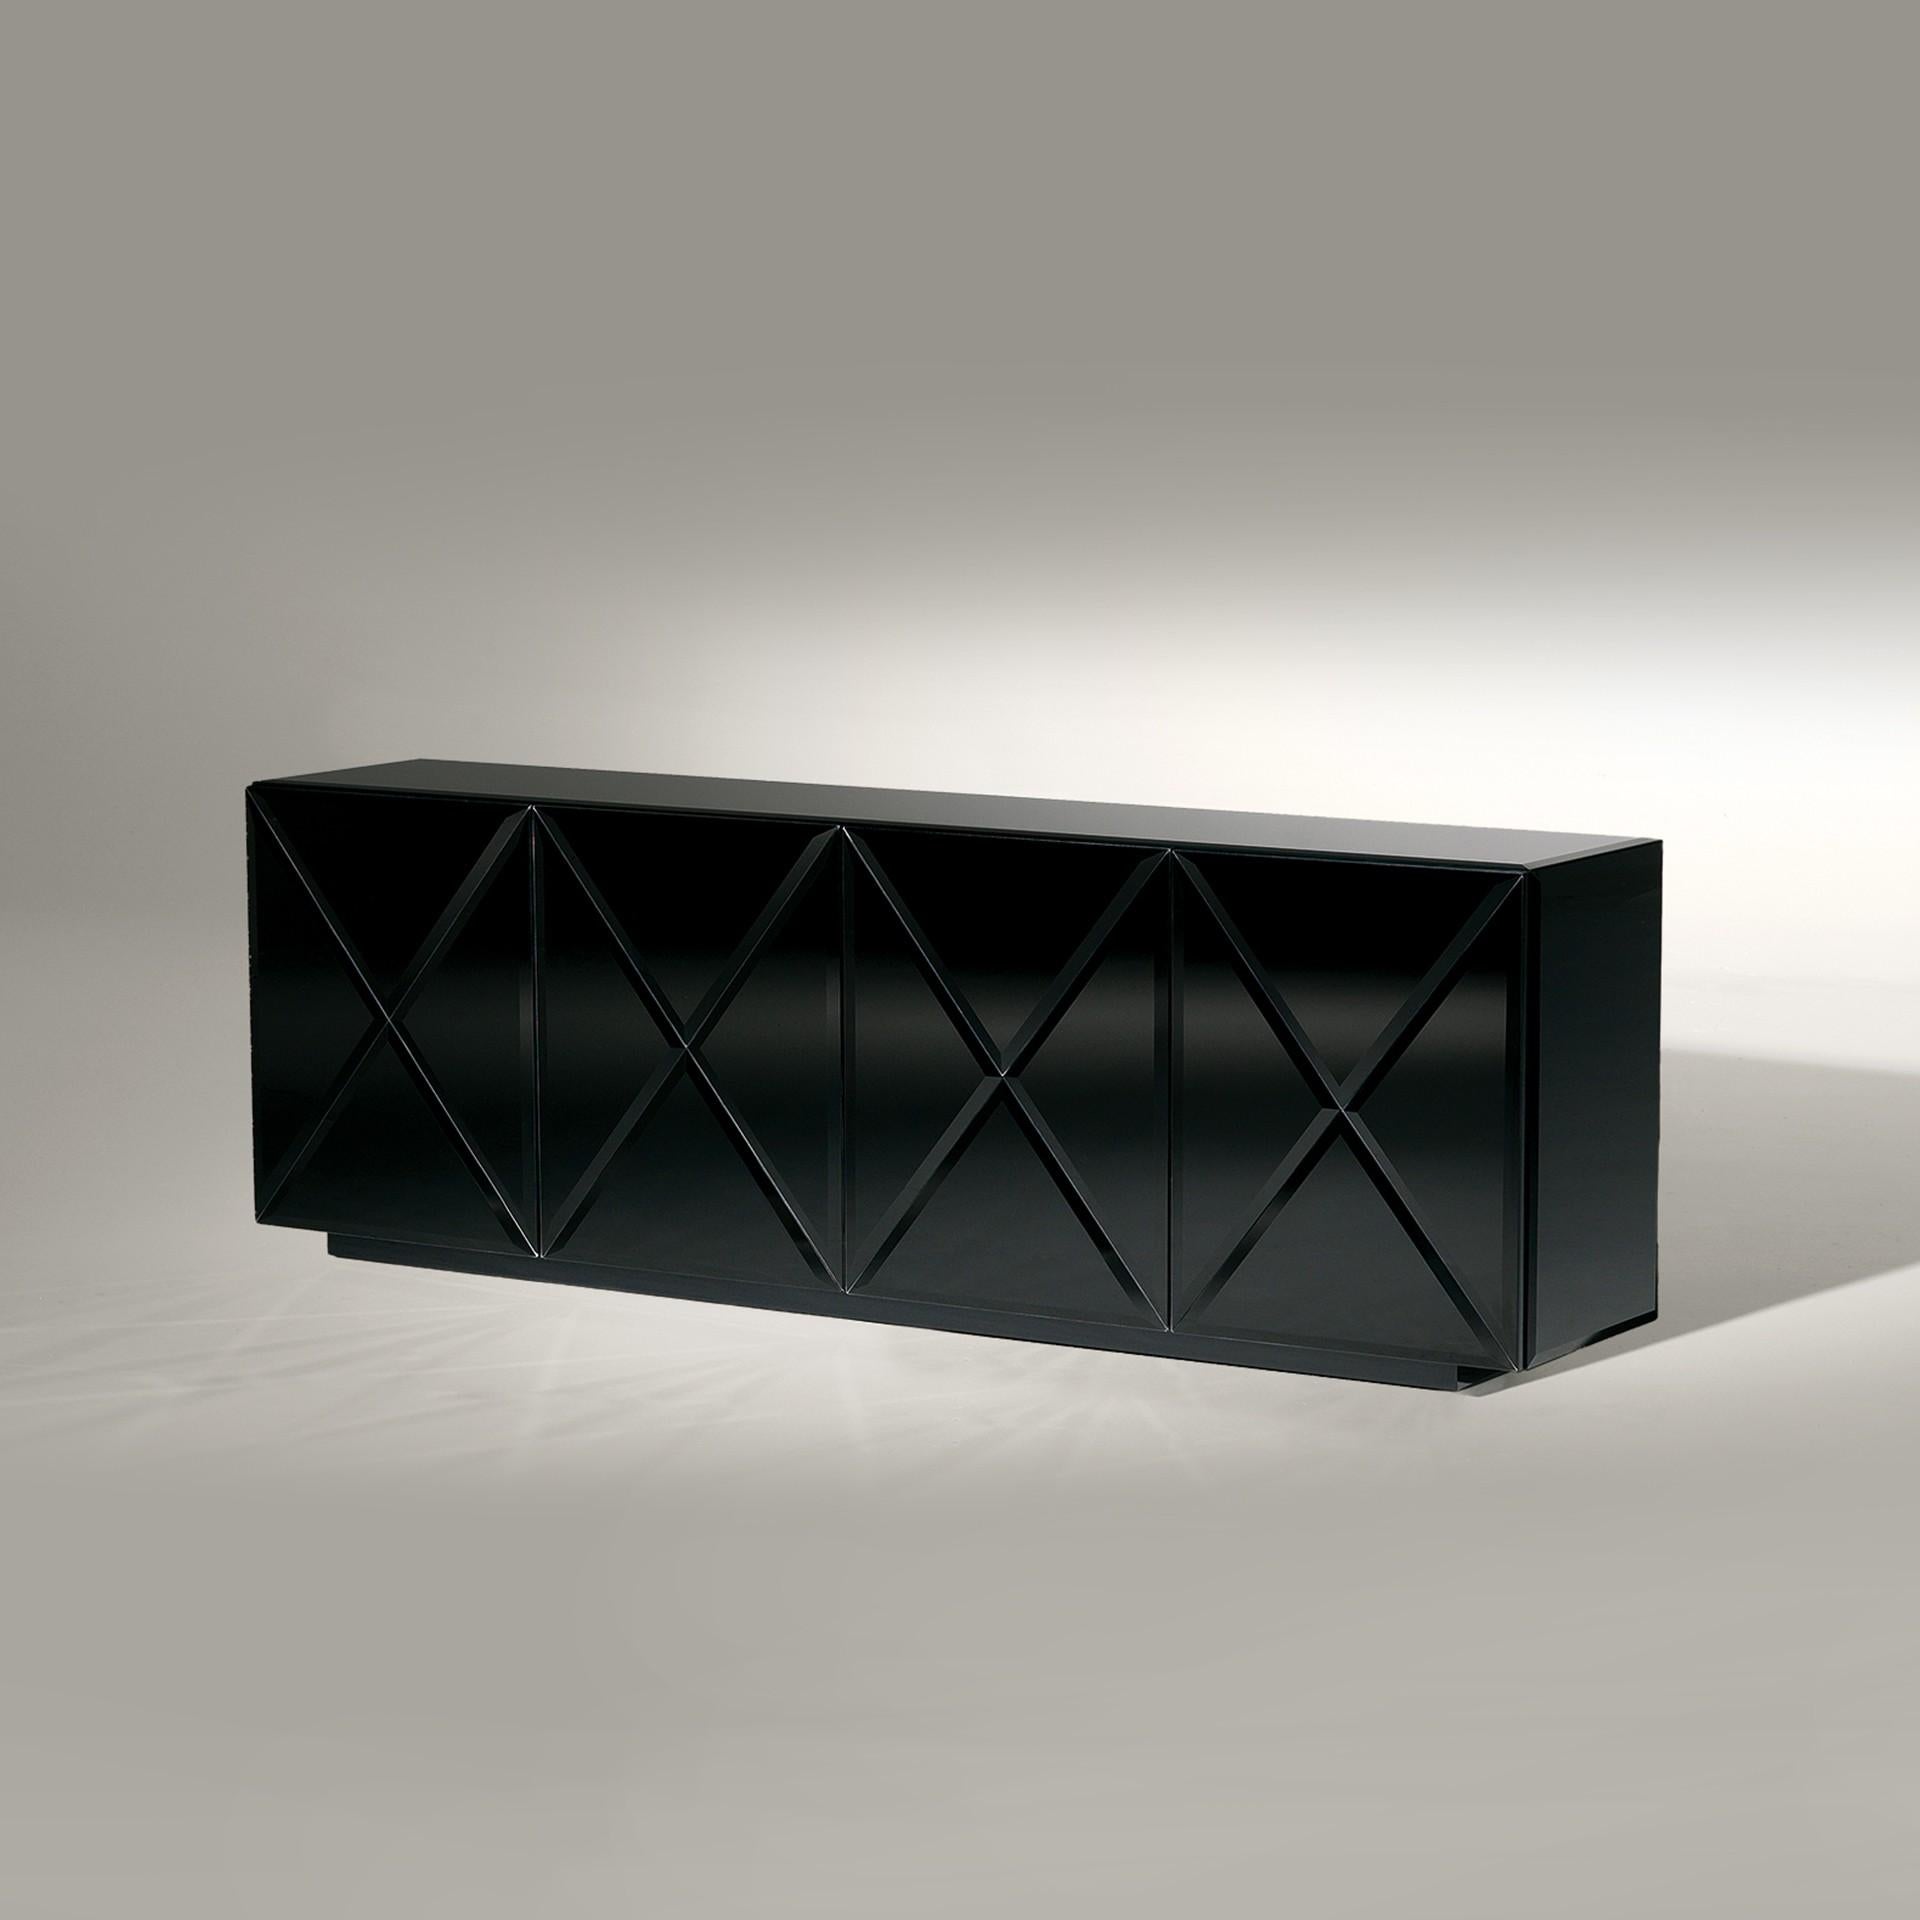 Sideboard covered with black mirror, 4 shelves adjustable and drawers on the interior with Leliévre velvet.

Bespoke / Customizable
Identical shapes with different sizes and finishings.
All RAL colors available. (Mate / Half Gloss / Gloss)